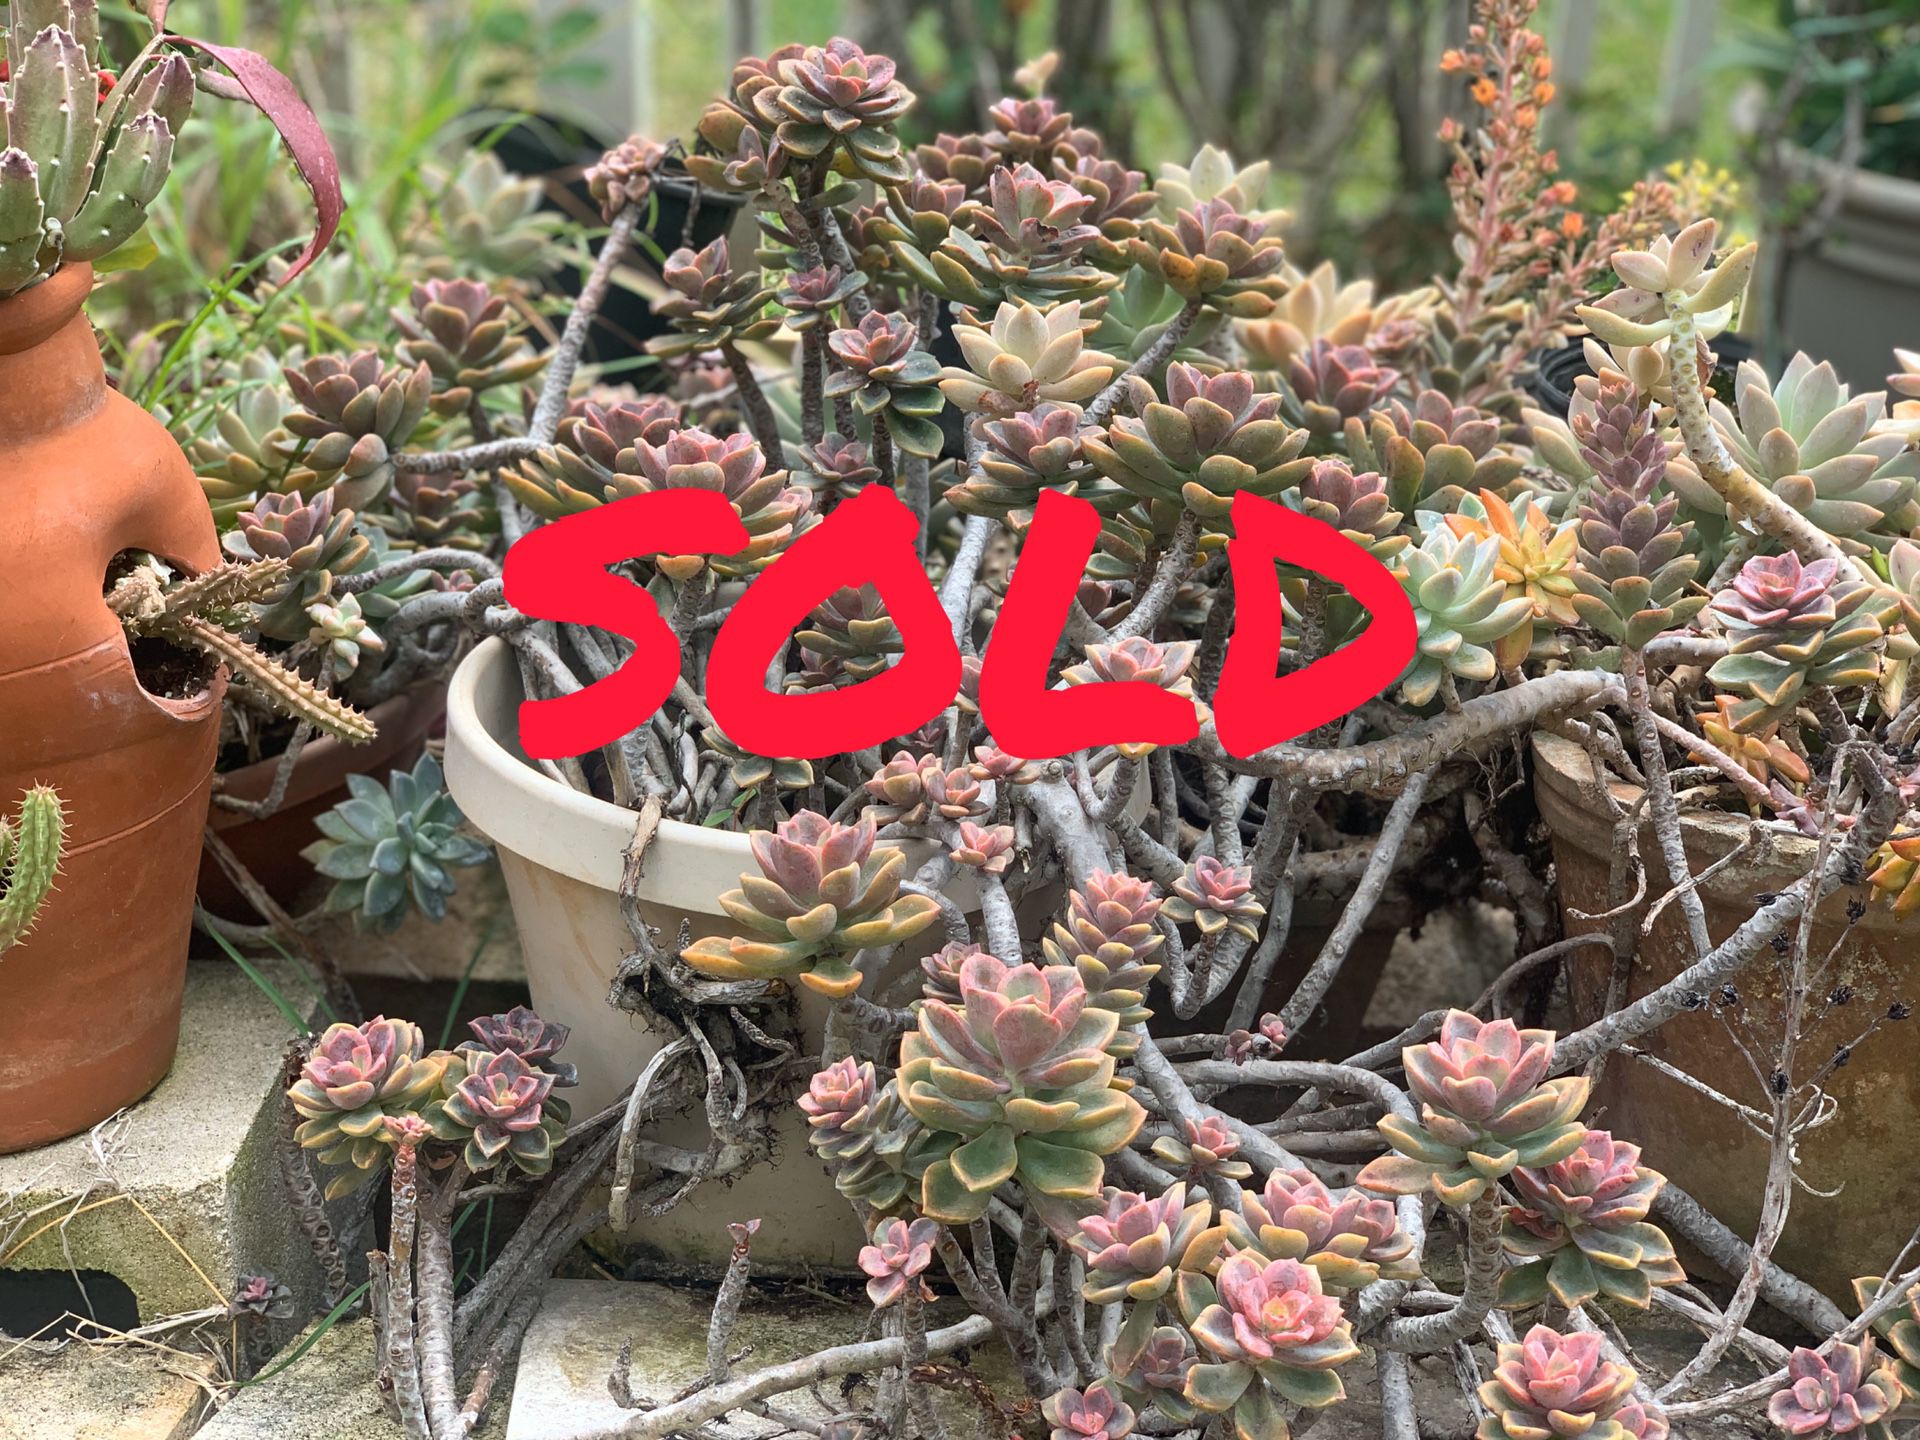 Succulents, Cacti, Airplants and so much more!